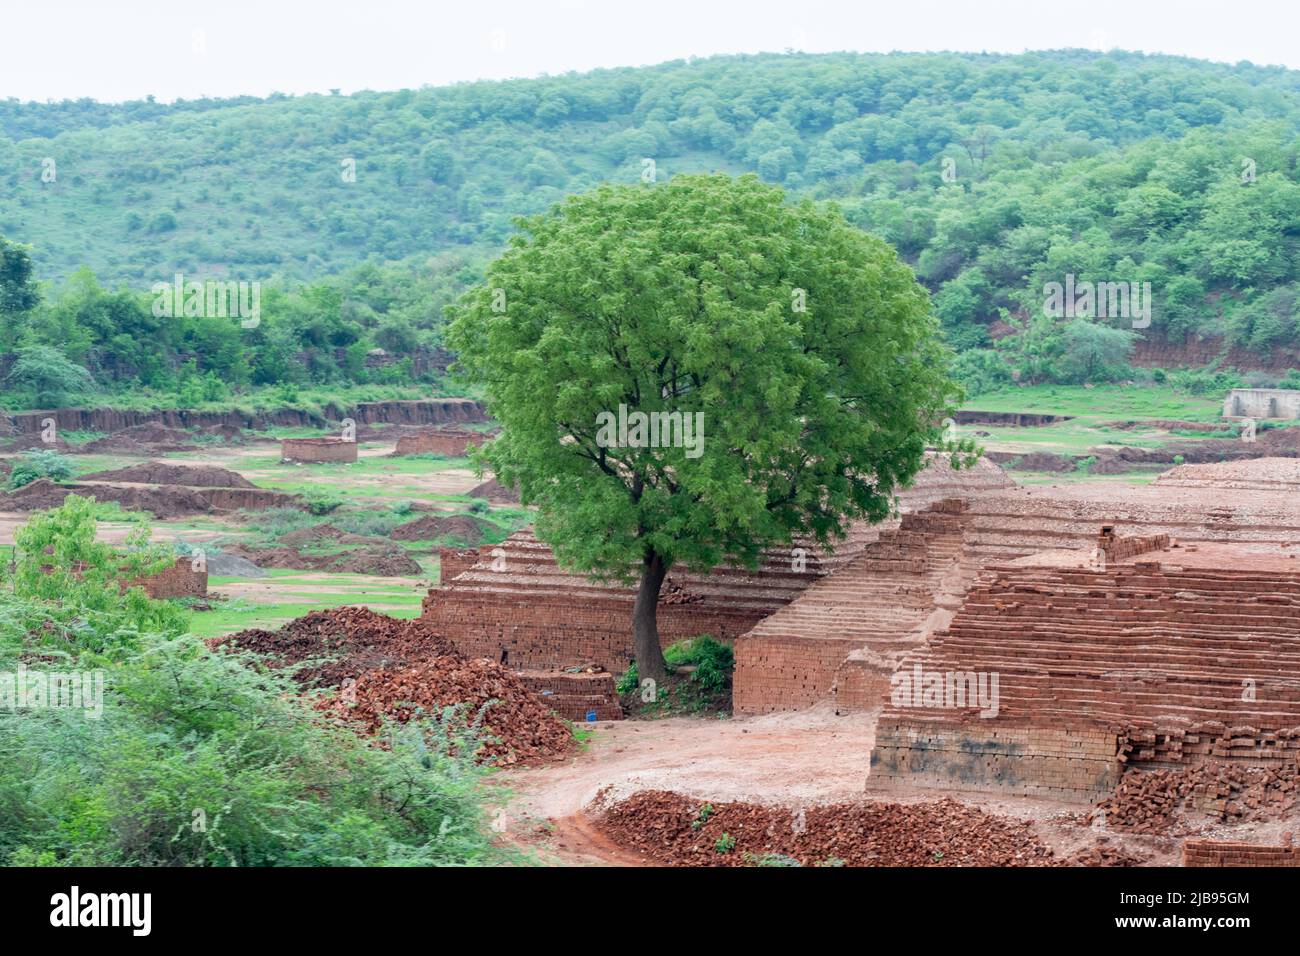 Bricks making place in India. Stock Photo